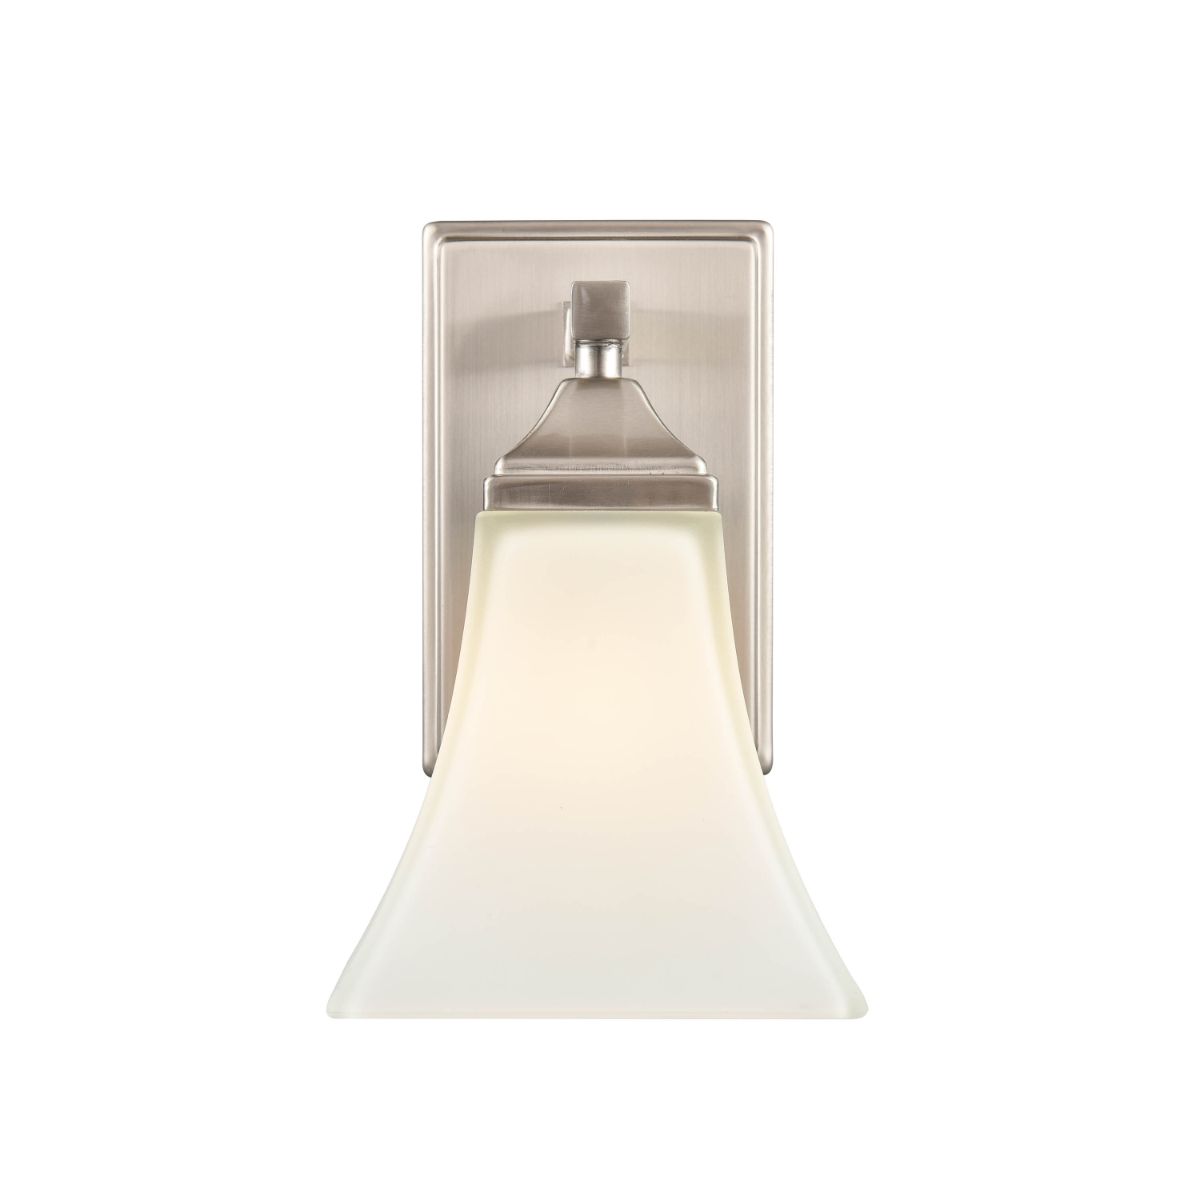 11 in. Armed Sconce Nickel finish